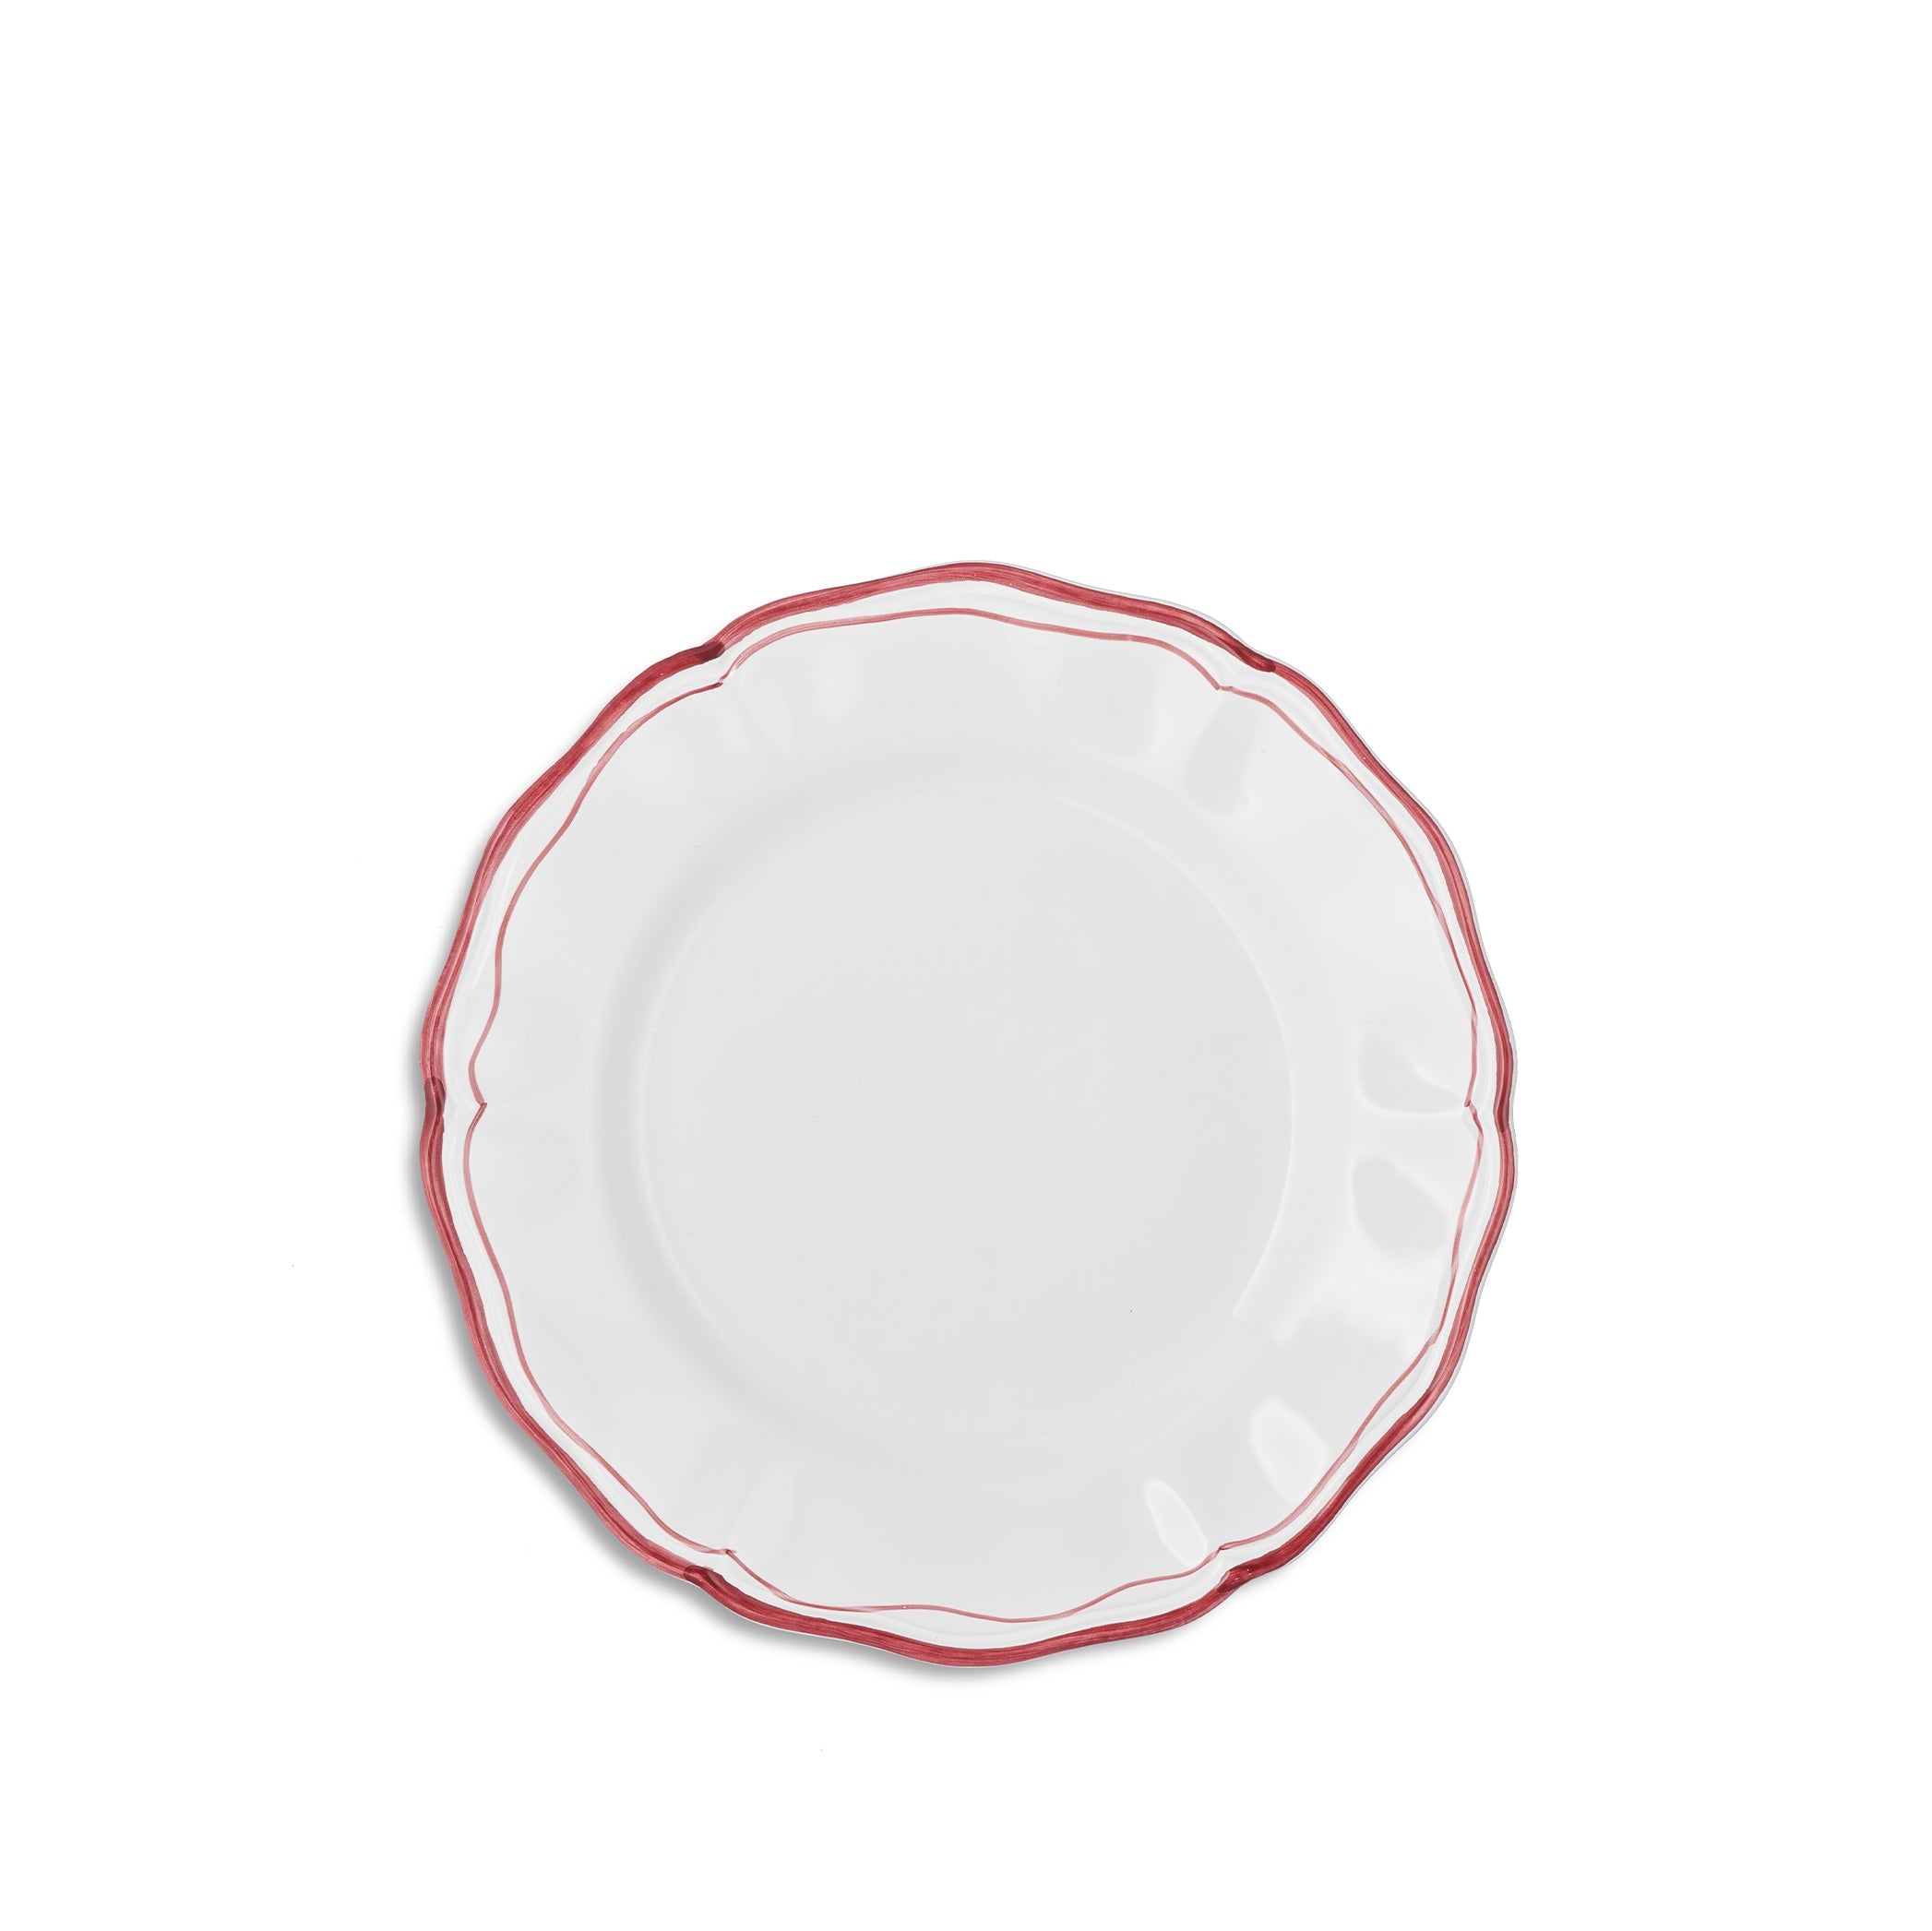 Scalloped Dinner Plate With Red Double Rim, 28cm